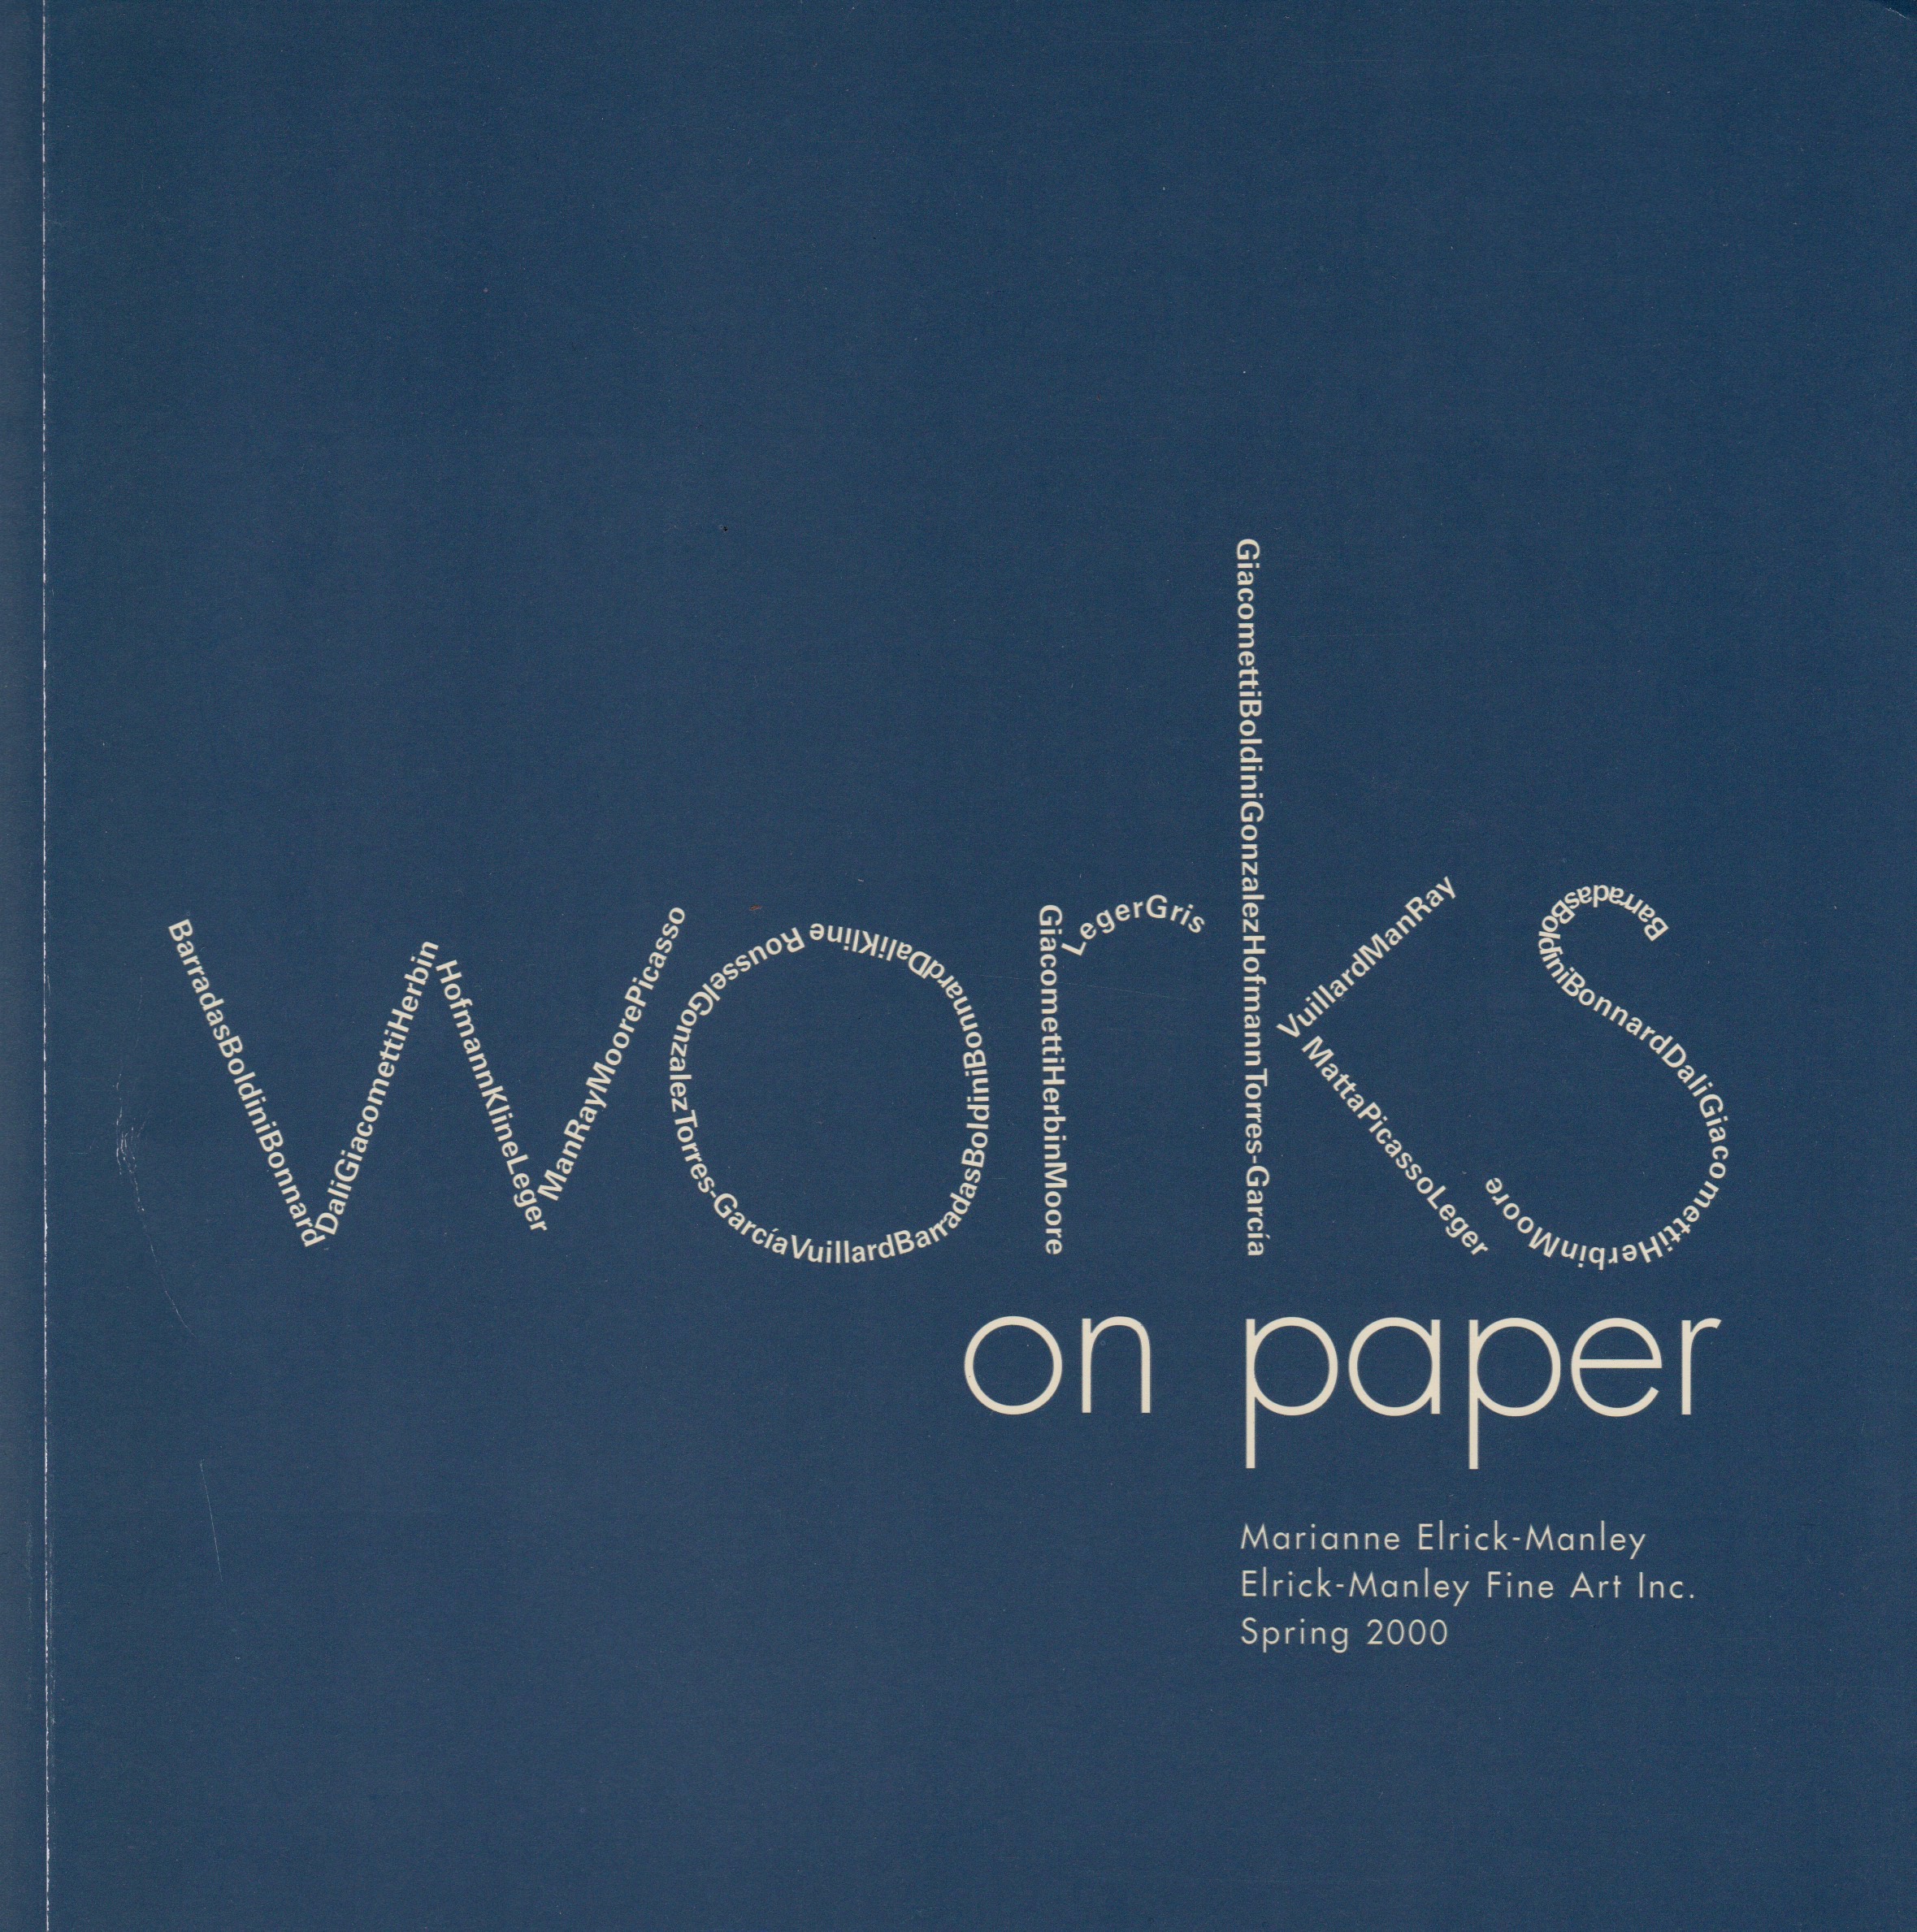 Works on Paper (2000)